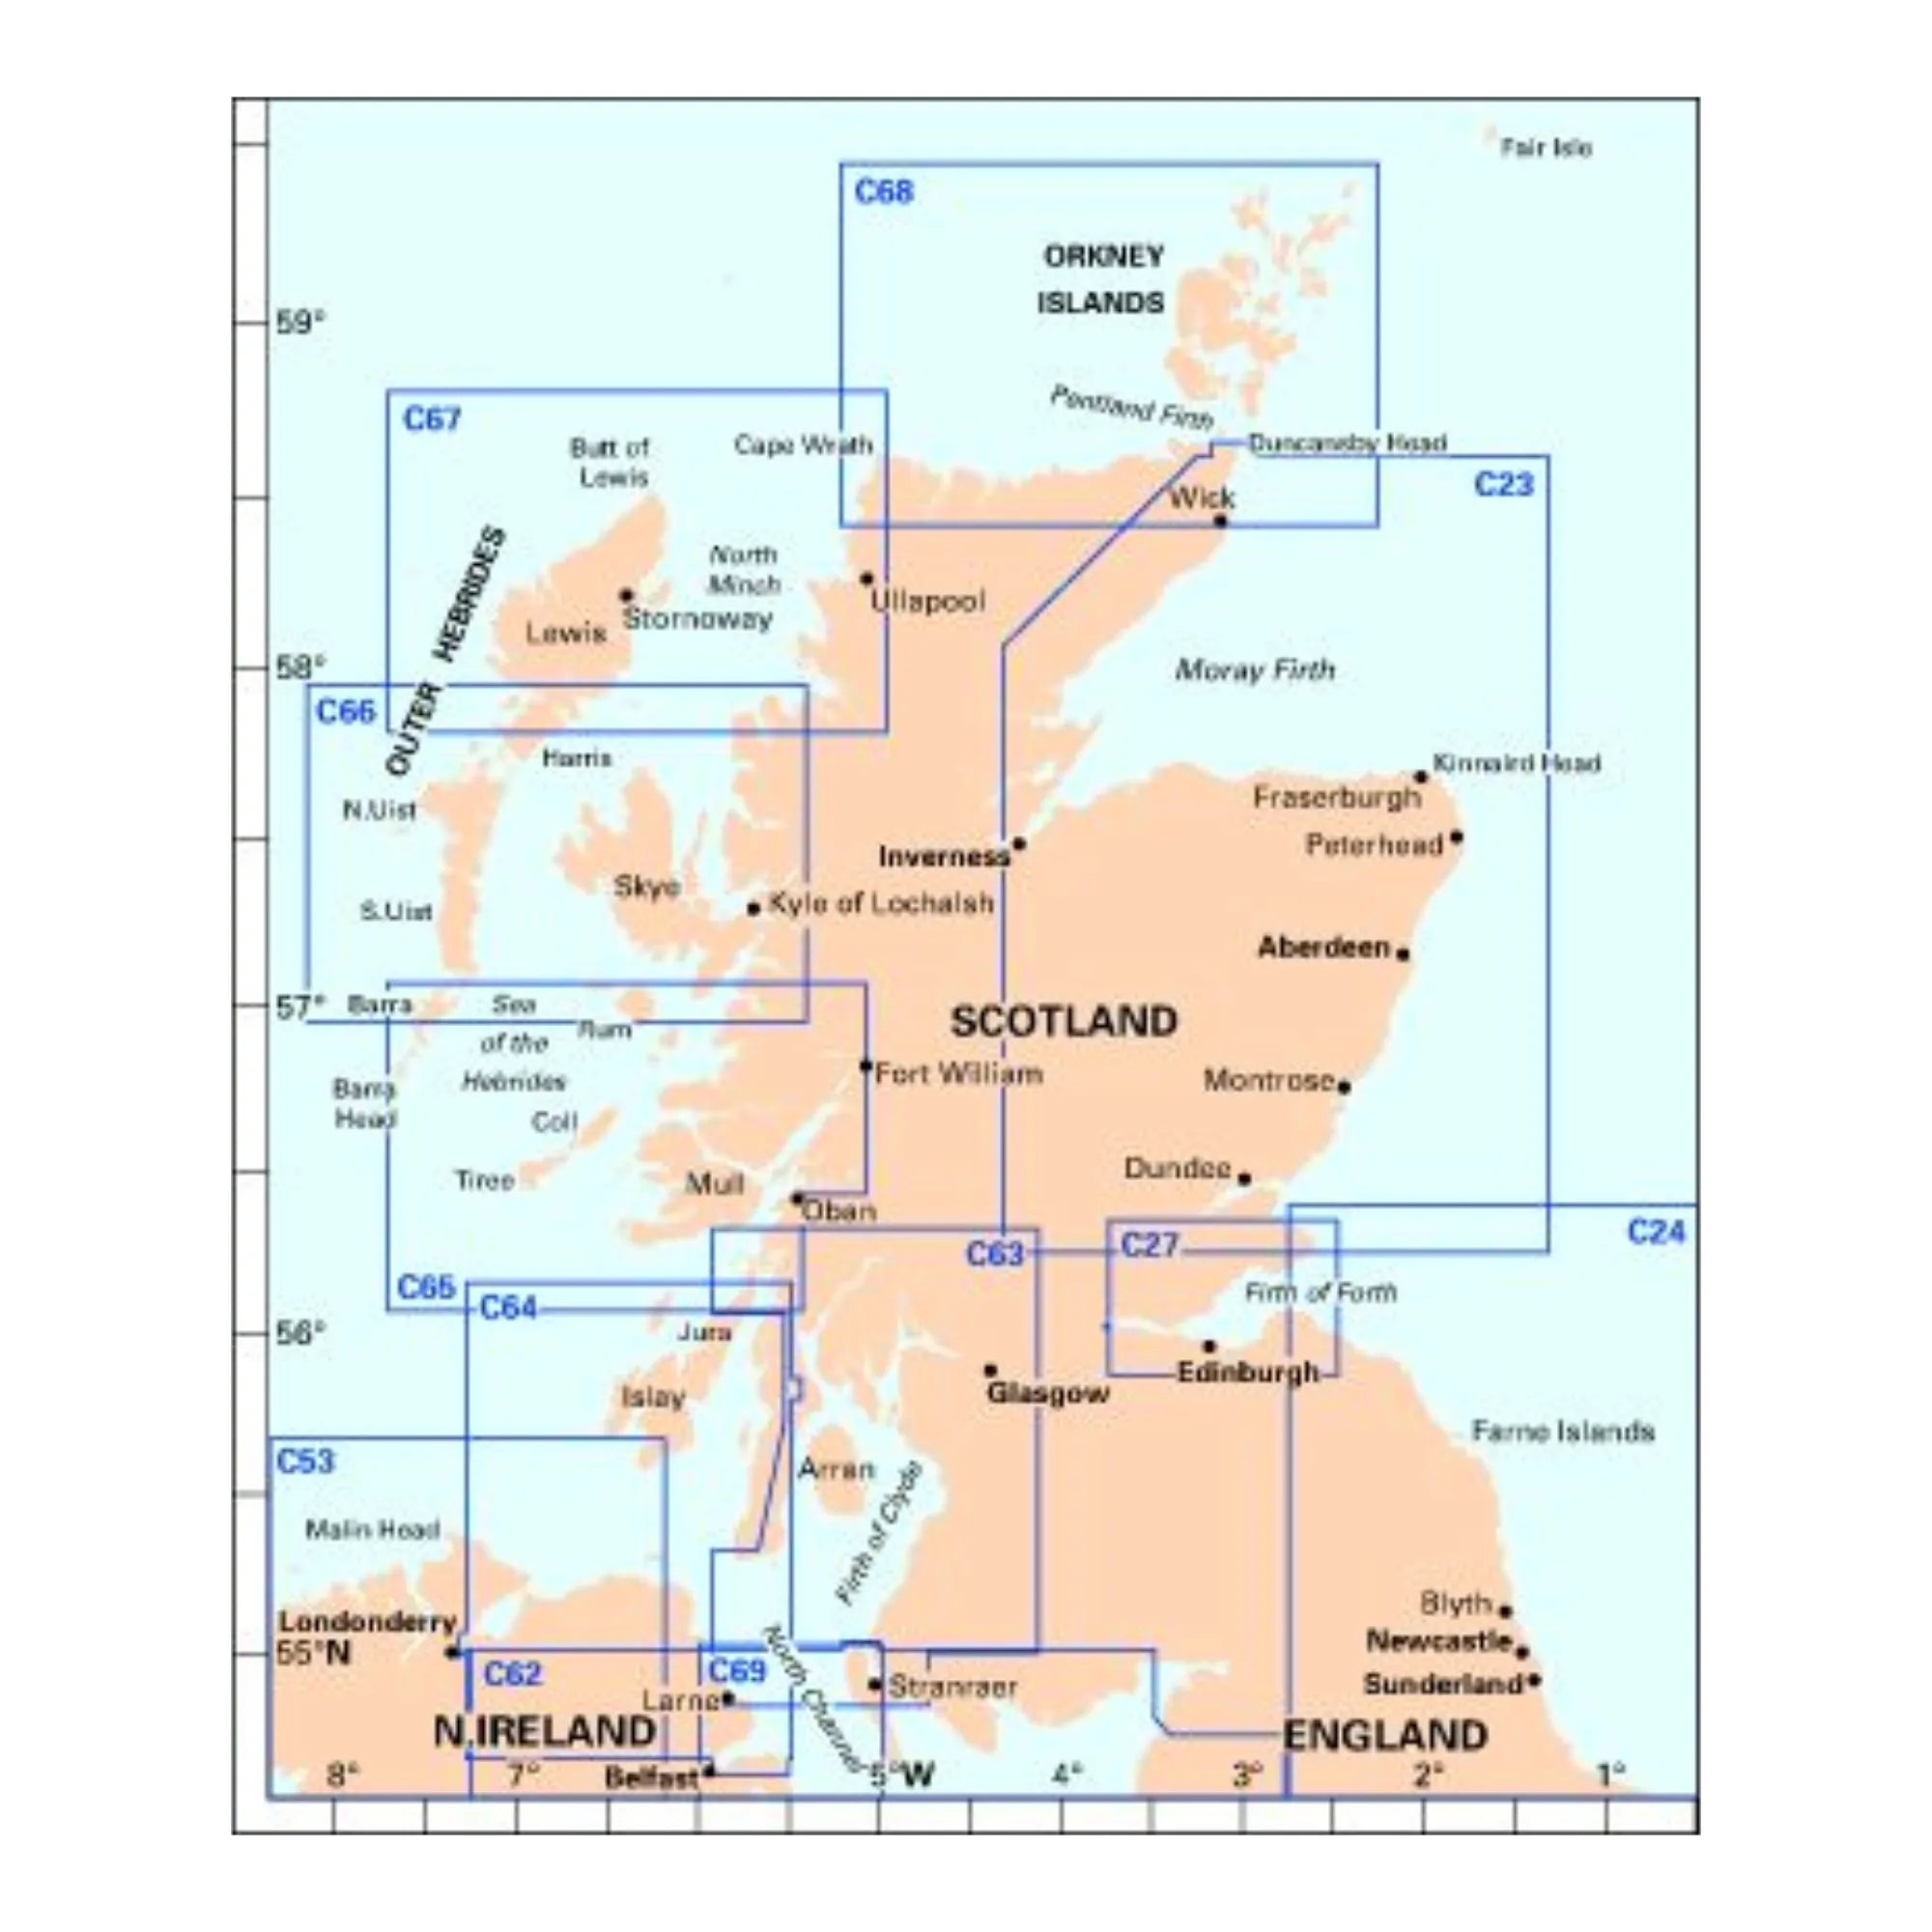 C68 Cape Wrath to Wick & The Orkney Islands